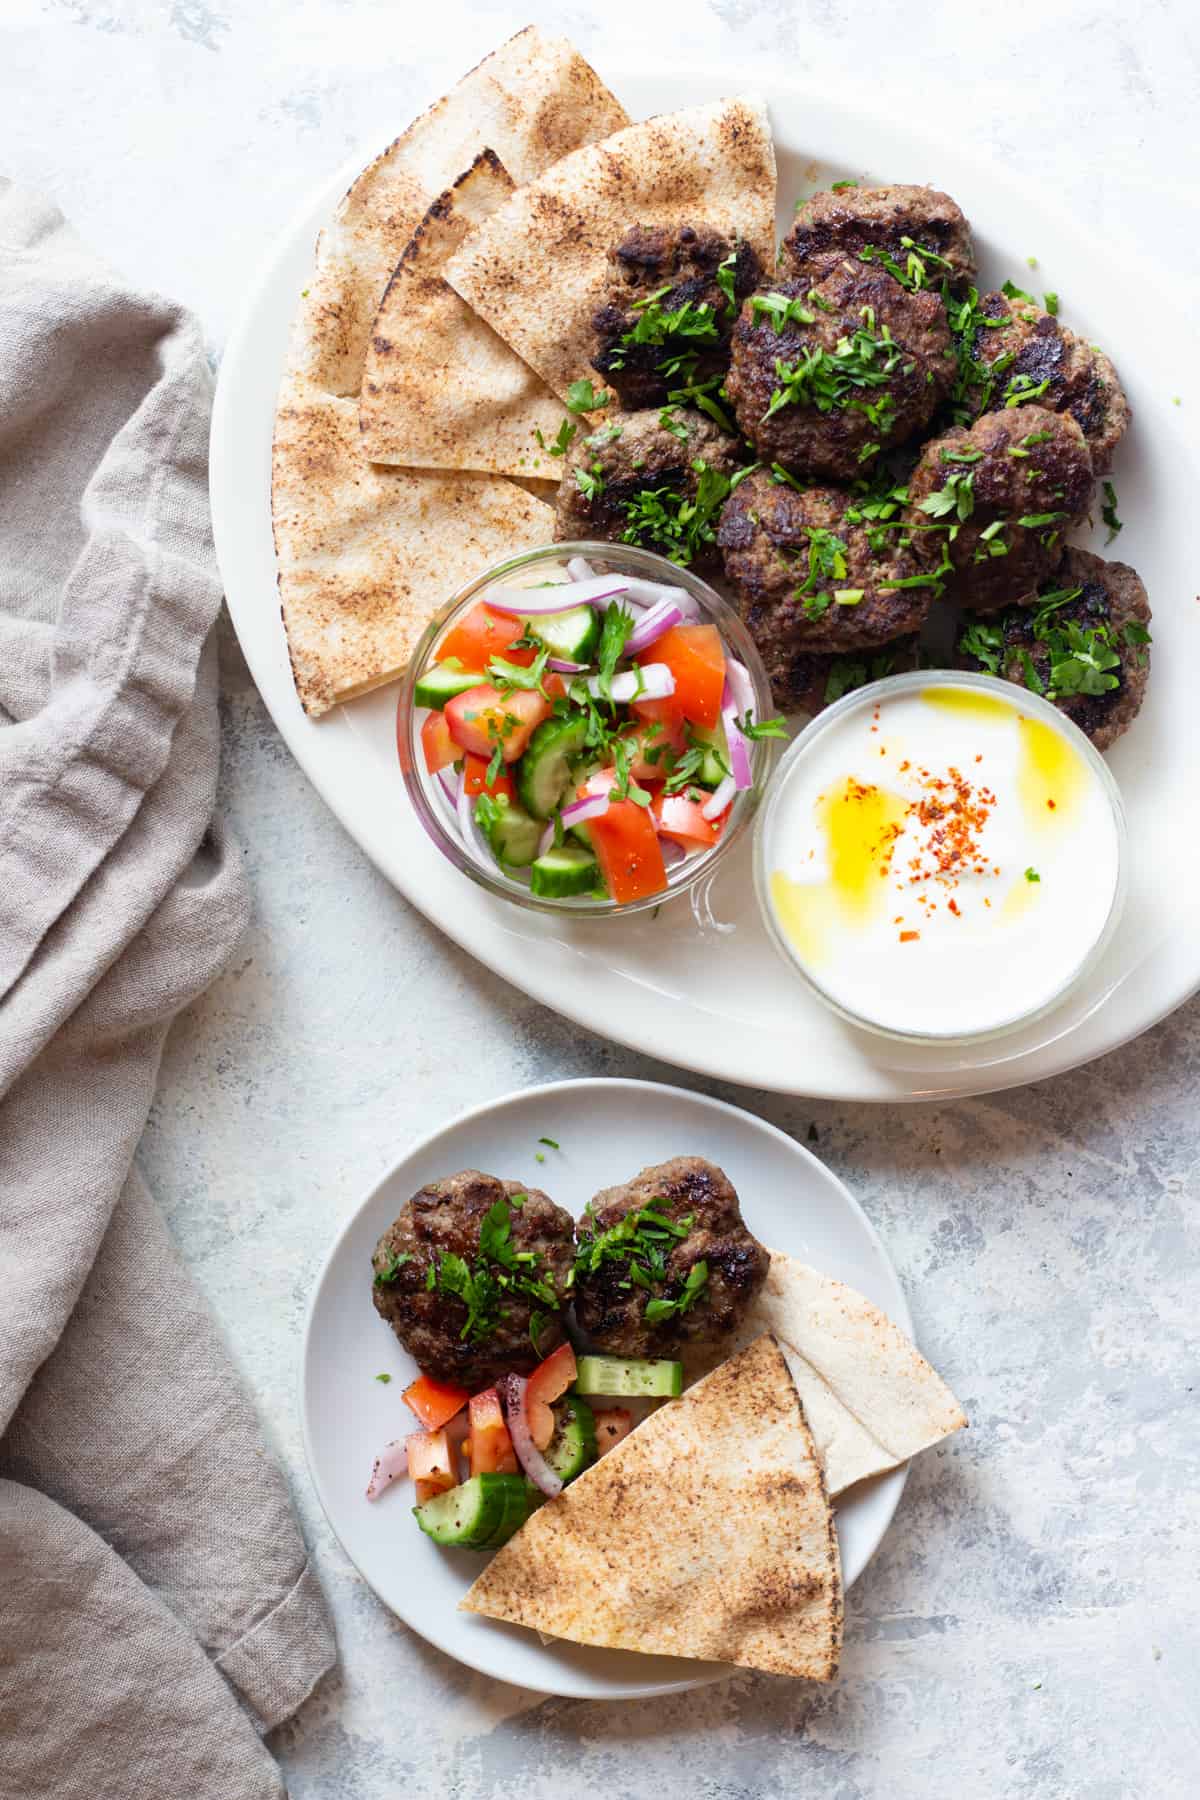 This is the best kofta kebab recipe! So easy and simple, made with just a few ingredients and ready in no time! These koftas are juicy and so delicious. For the perfect meal serve them with pita, salad and a delicious yogurt sauce. 